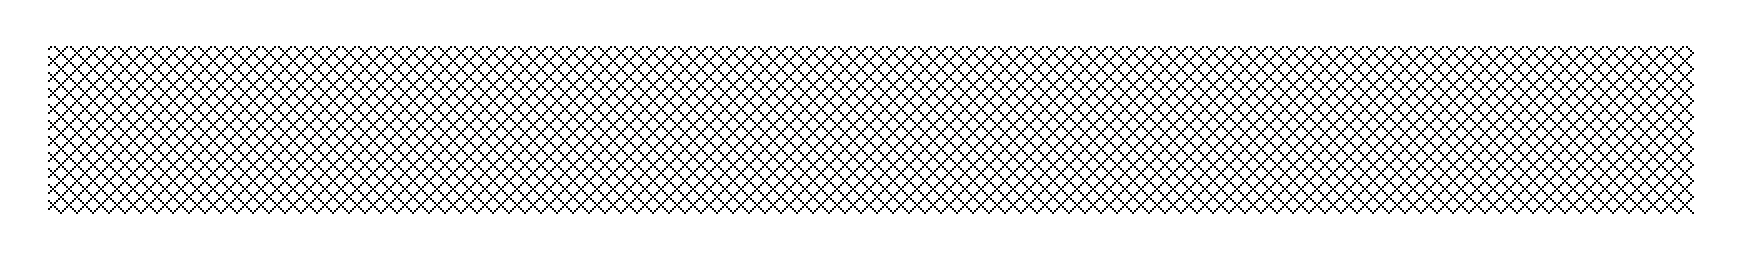 Diagonal Grid within clipped Rect